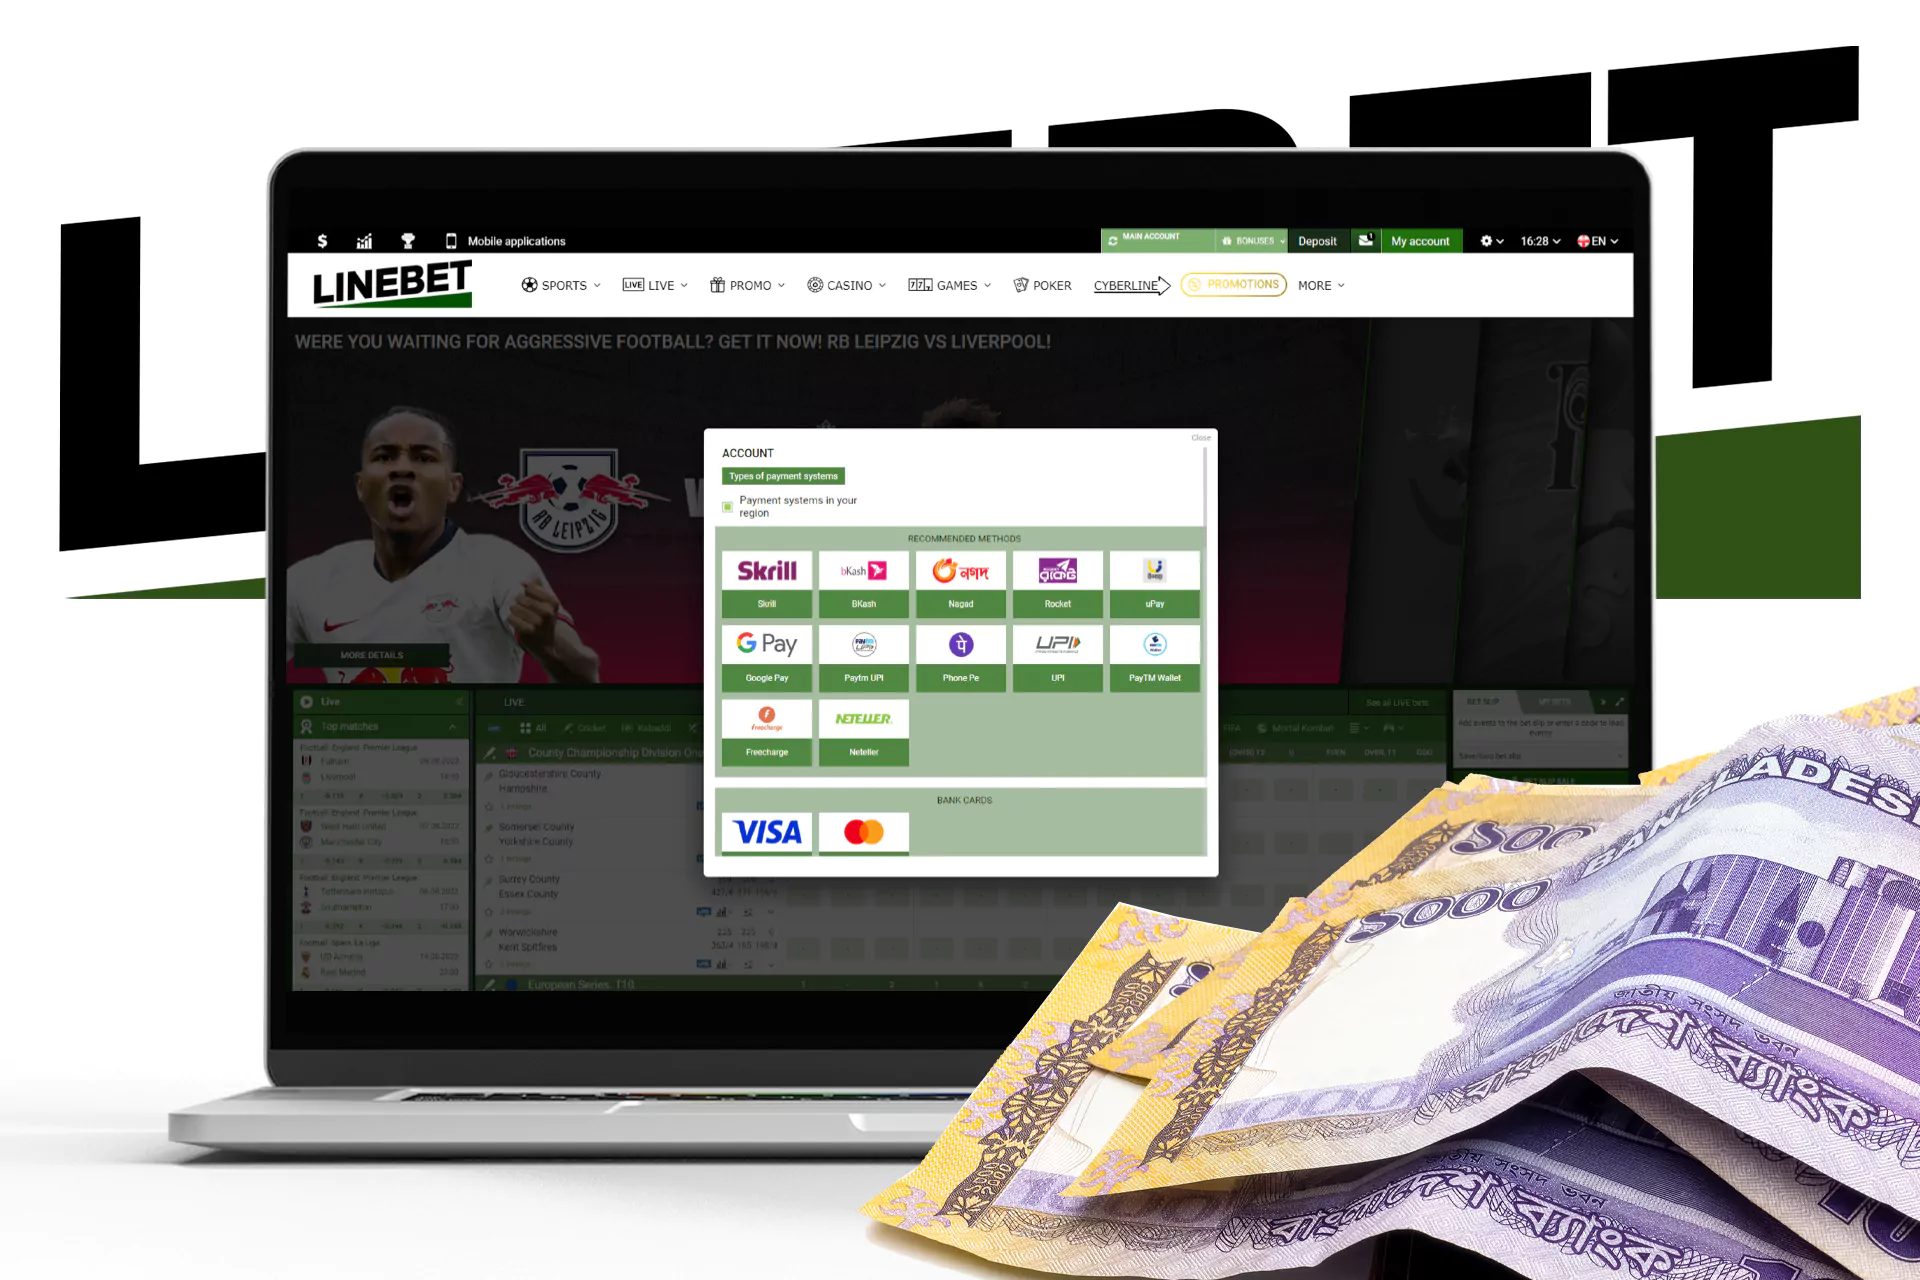 After you sign up, make a deposit to start betting.